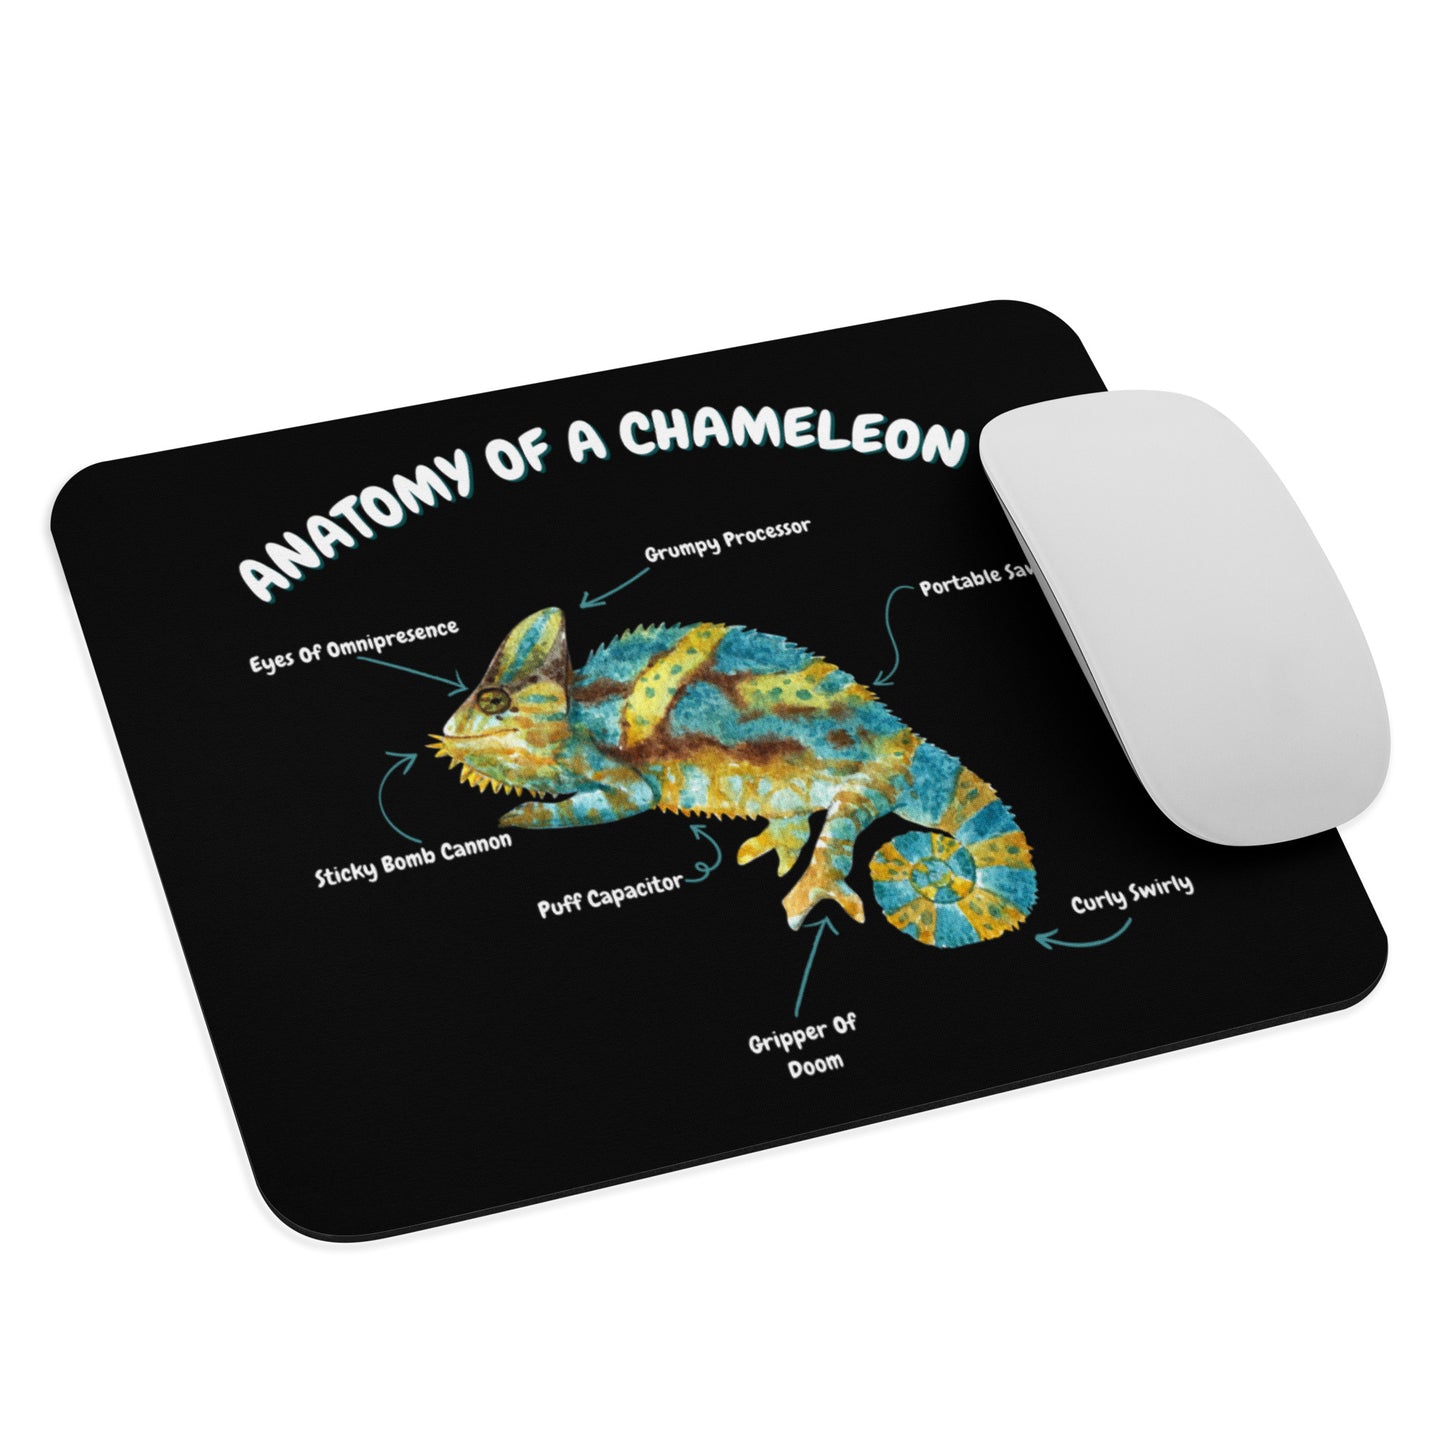 Anatomy of a Chameleon Mouse pad